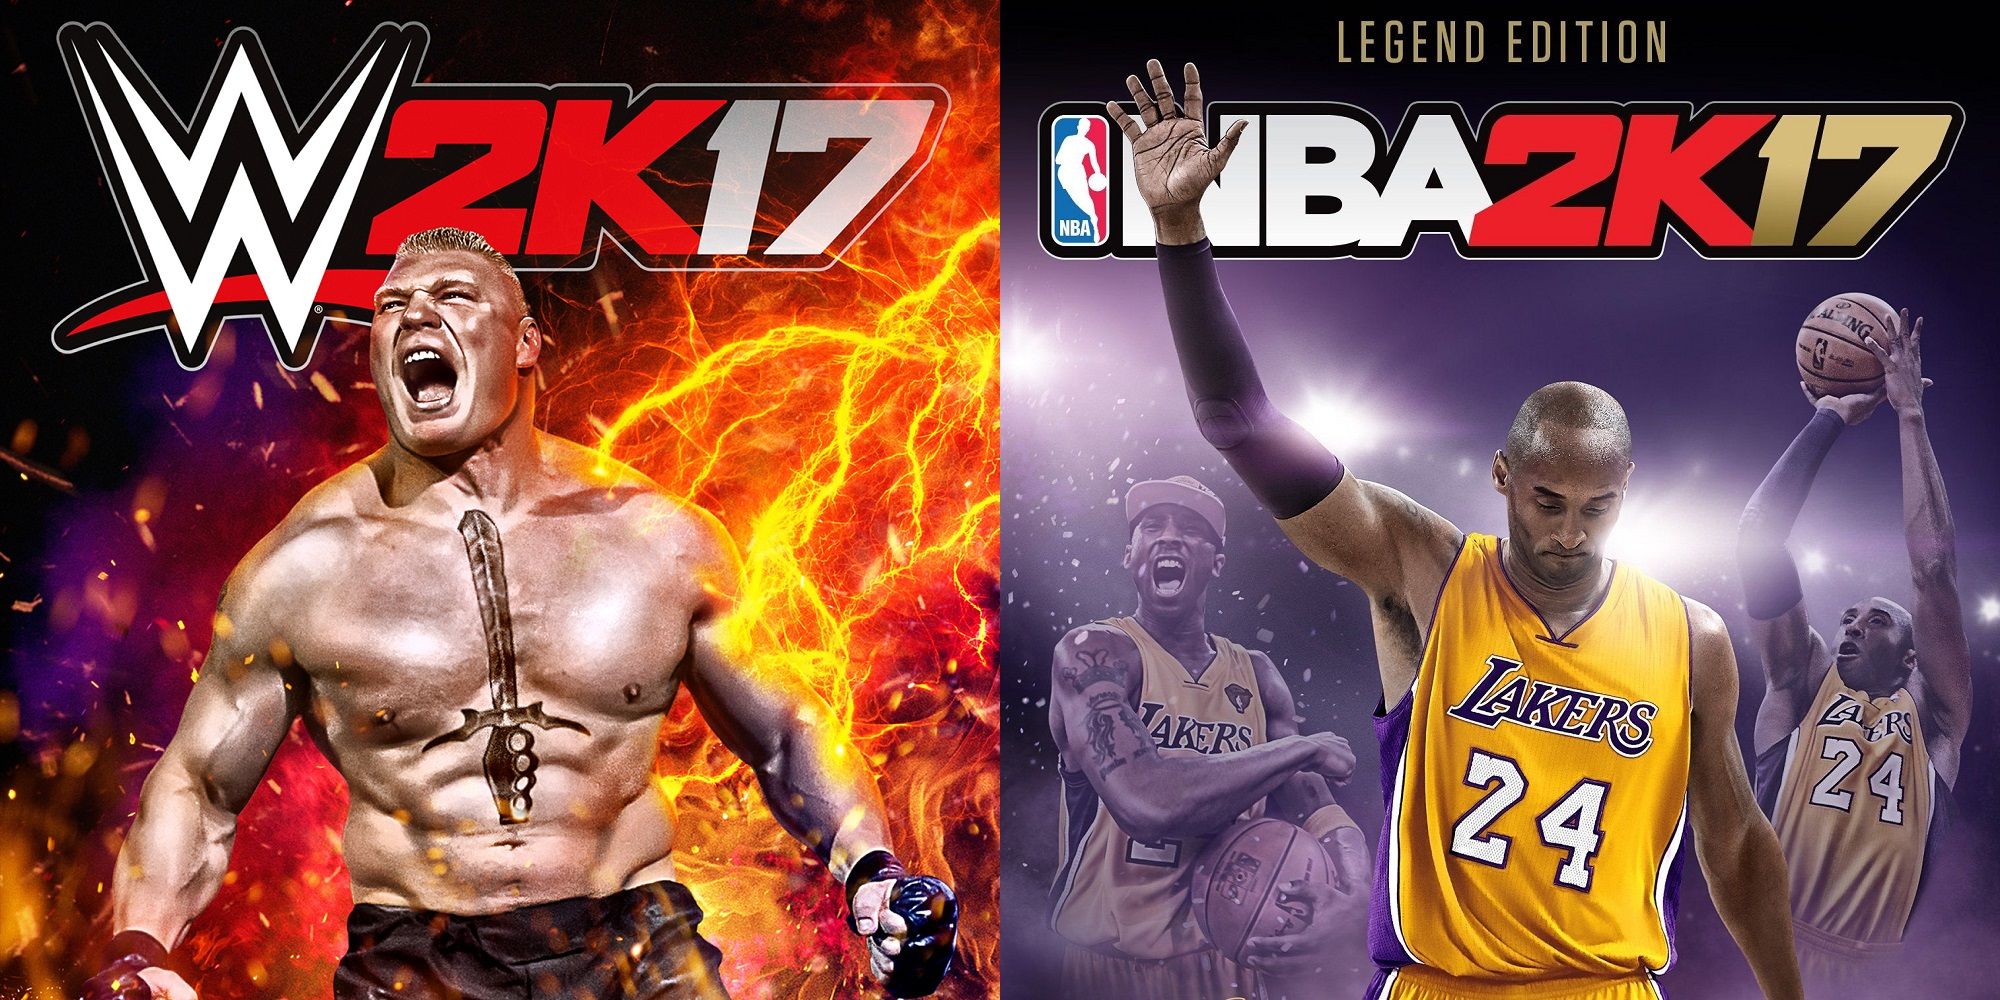 WWE 2K17 and NBA 2K17 from 2K Sports